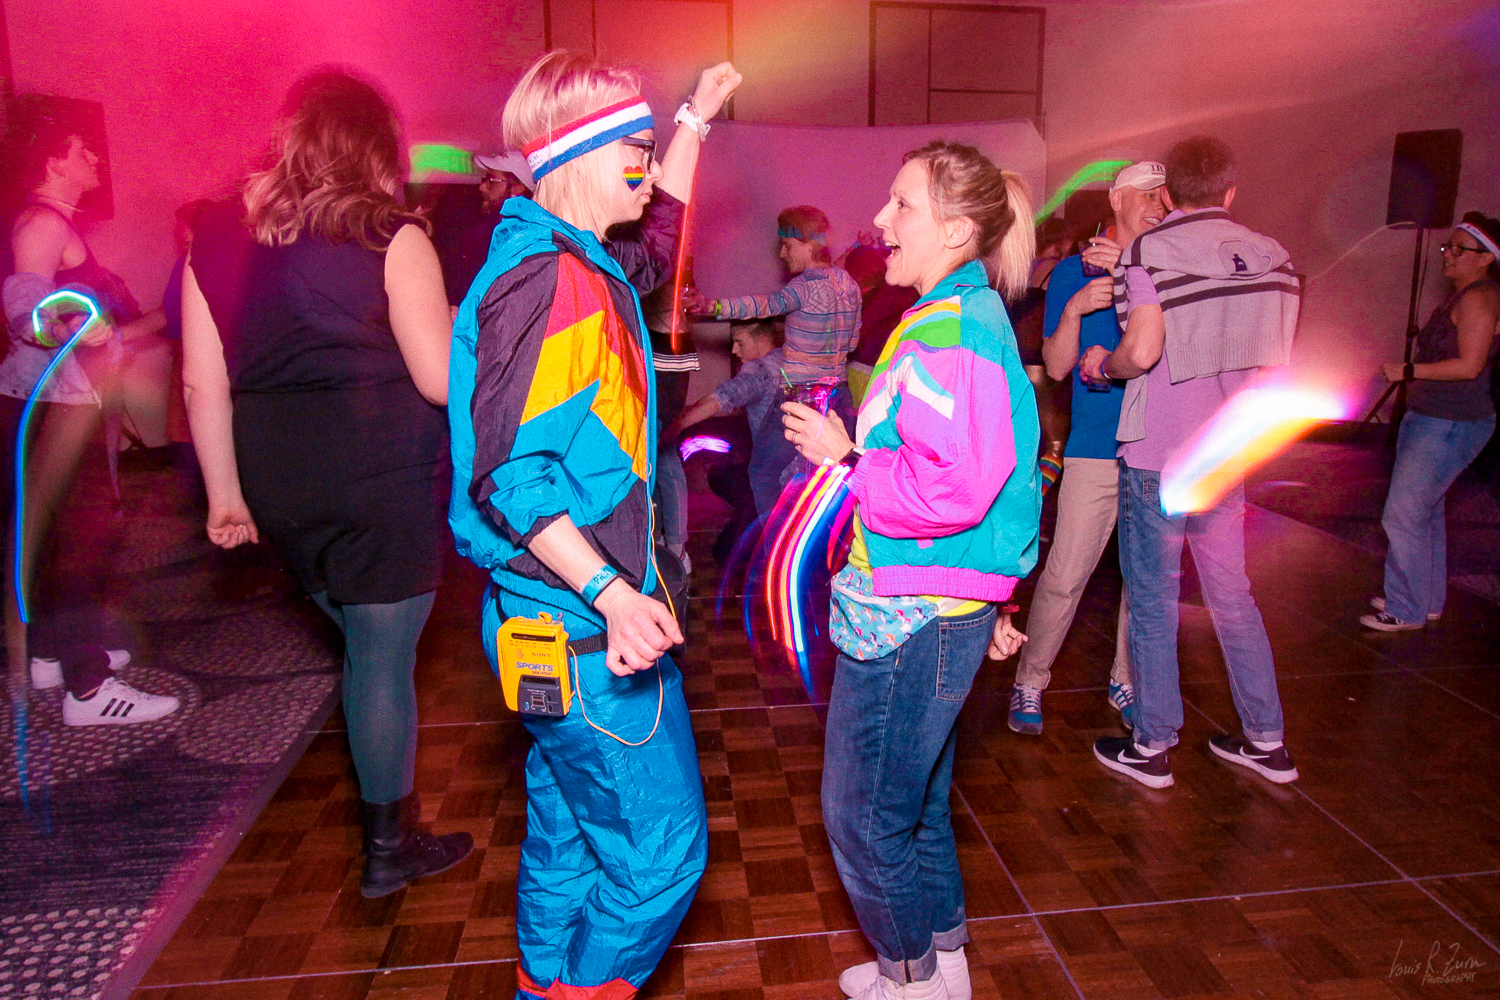 FM Winter Pride Totally Gay 80's Dance Party